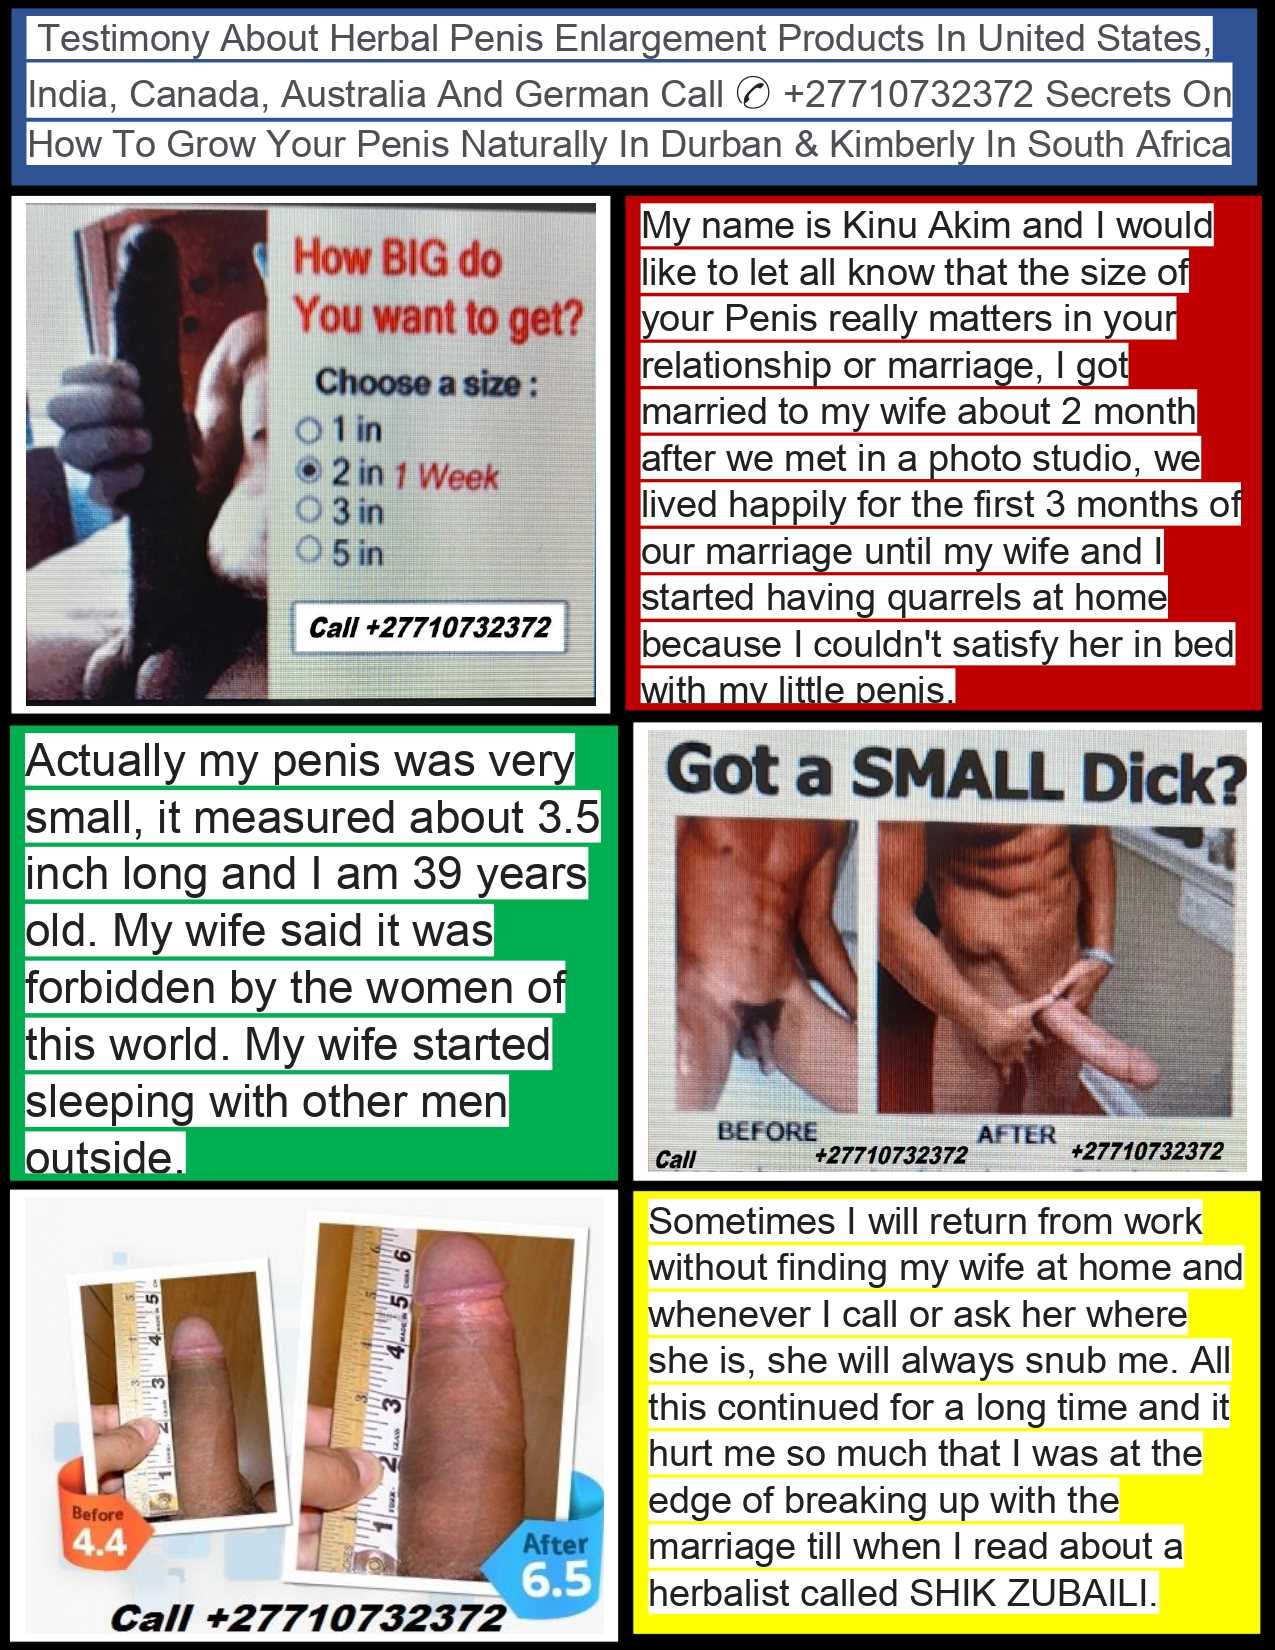 Testimony About Herbal Penis Enlargement Products In Muswellbrook Town in Australia And Bloemfontein City In Free State Call ✆ +27710732372 Solve Love Problems In Polokwane City In South Africa And Kuta Town In Bali, Indonesia